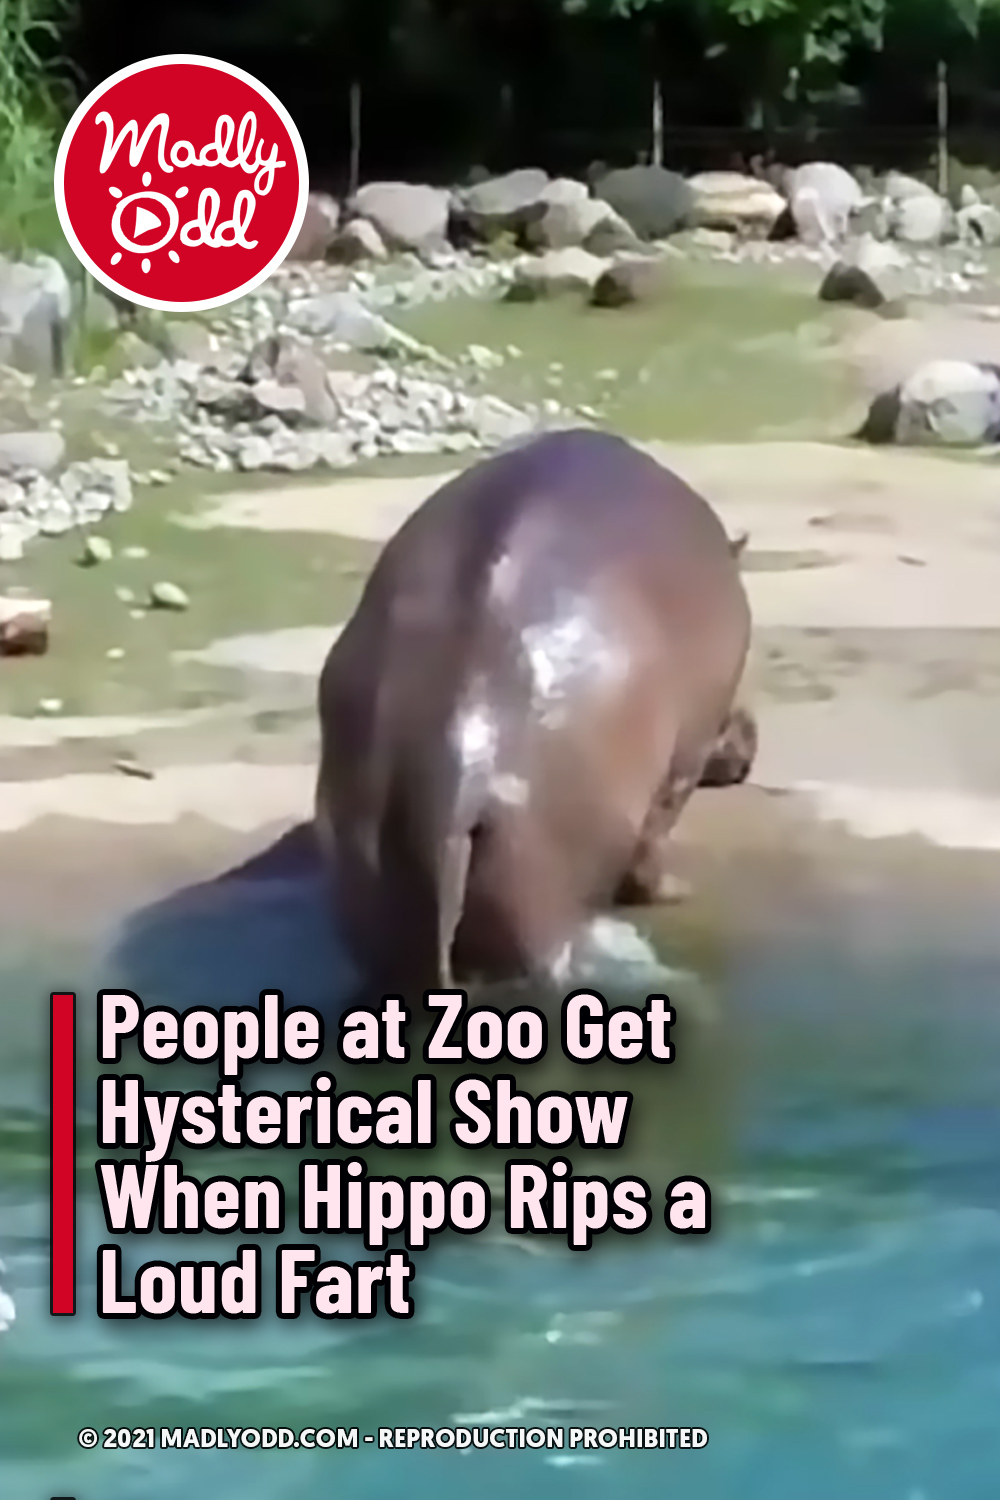 People at Zoo Get Hysterical Show When Hippo Rips a Loud Fart